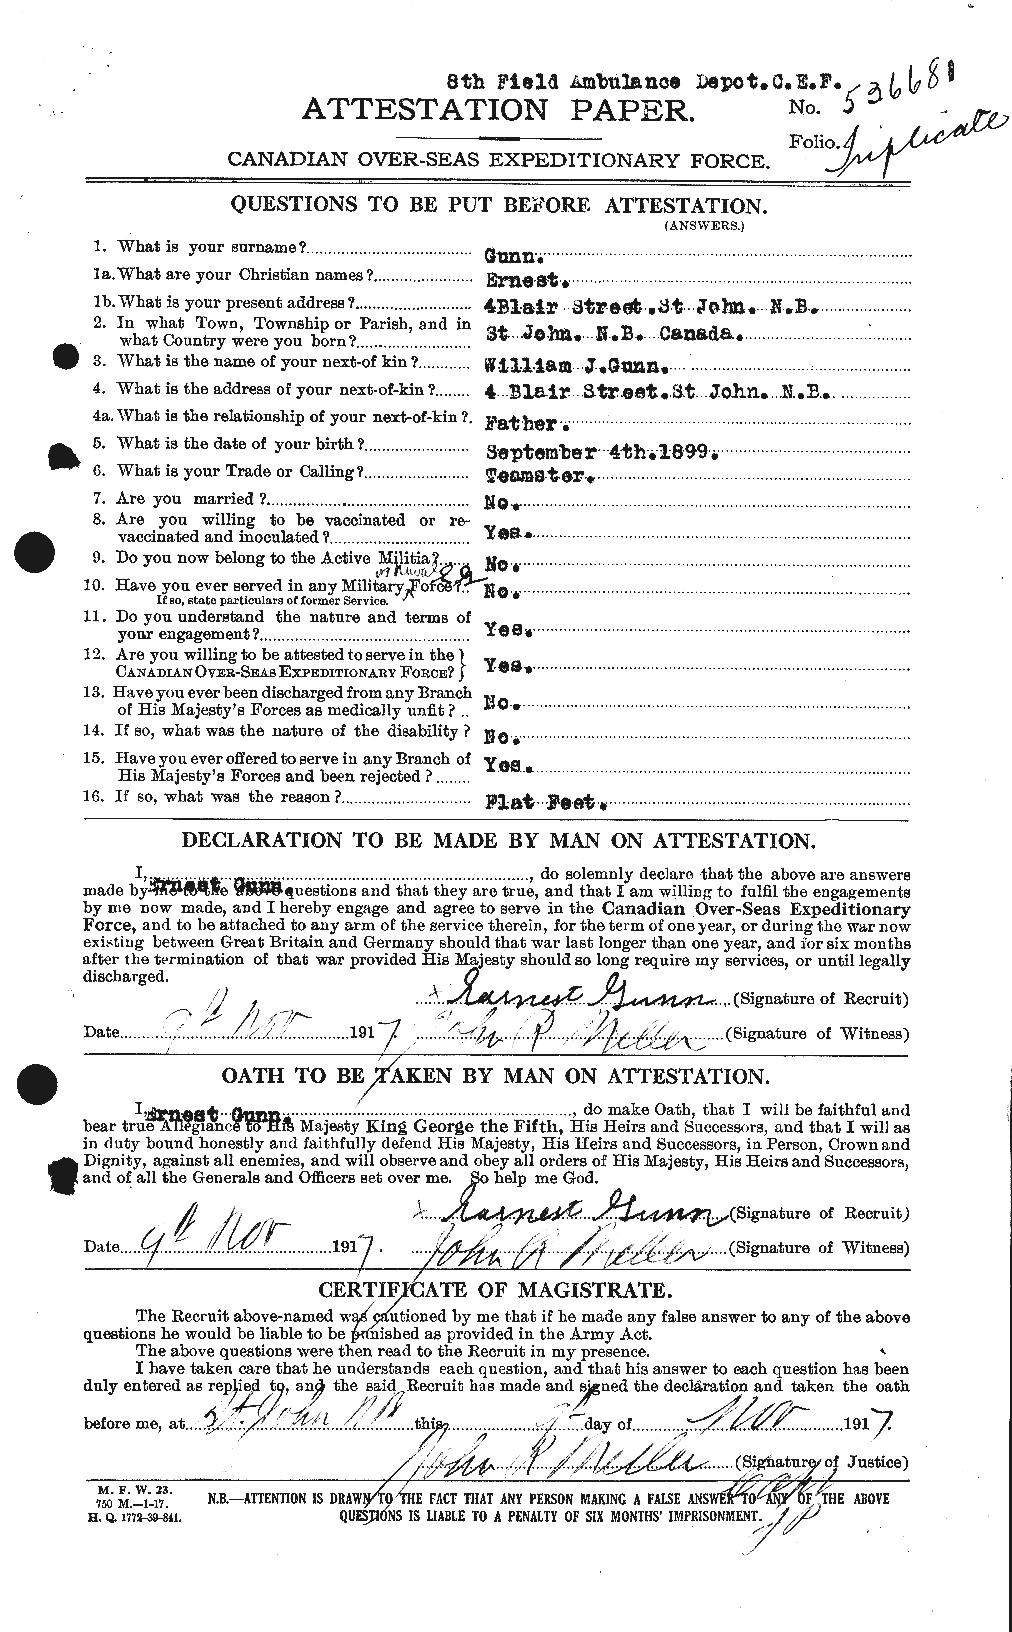 Personnel Records of the First World War - CEF 368038a